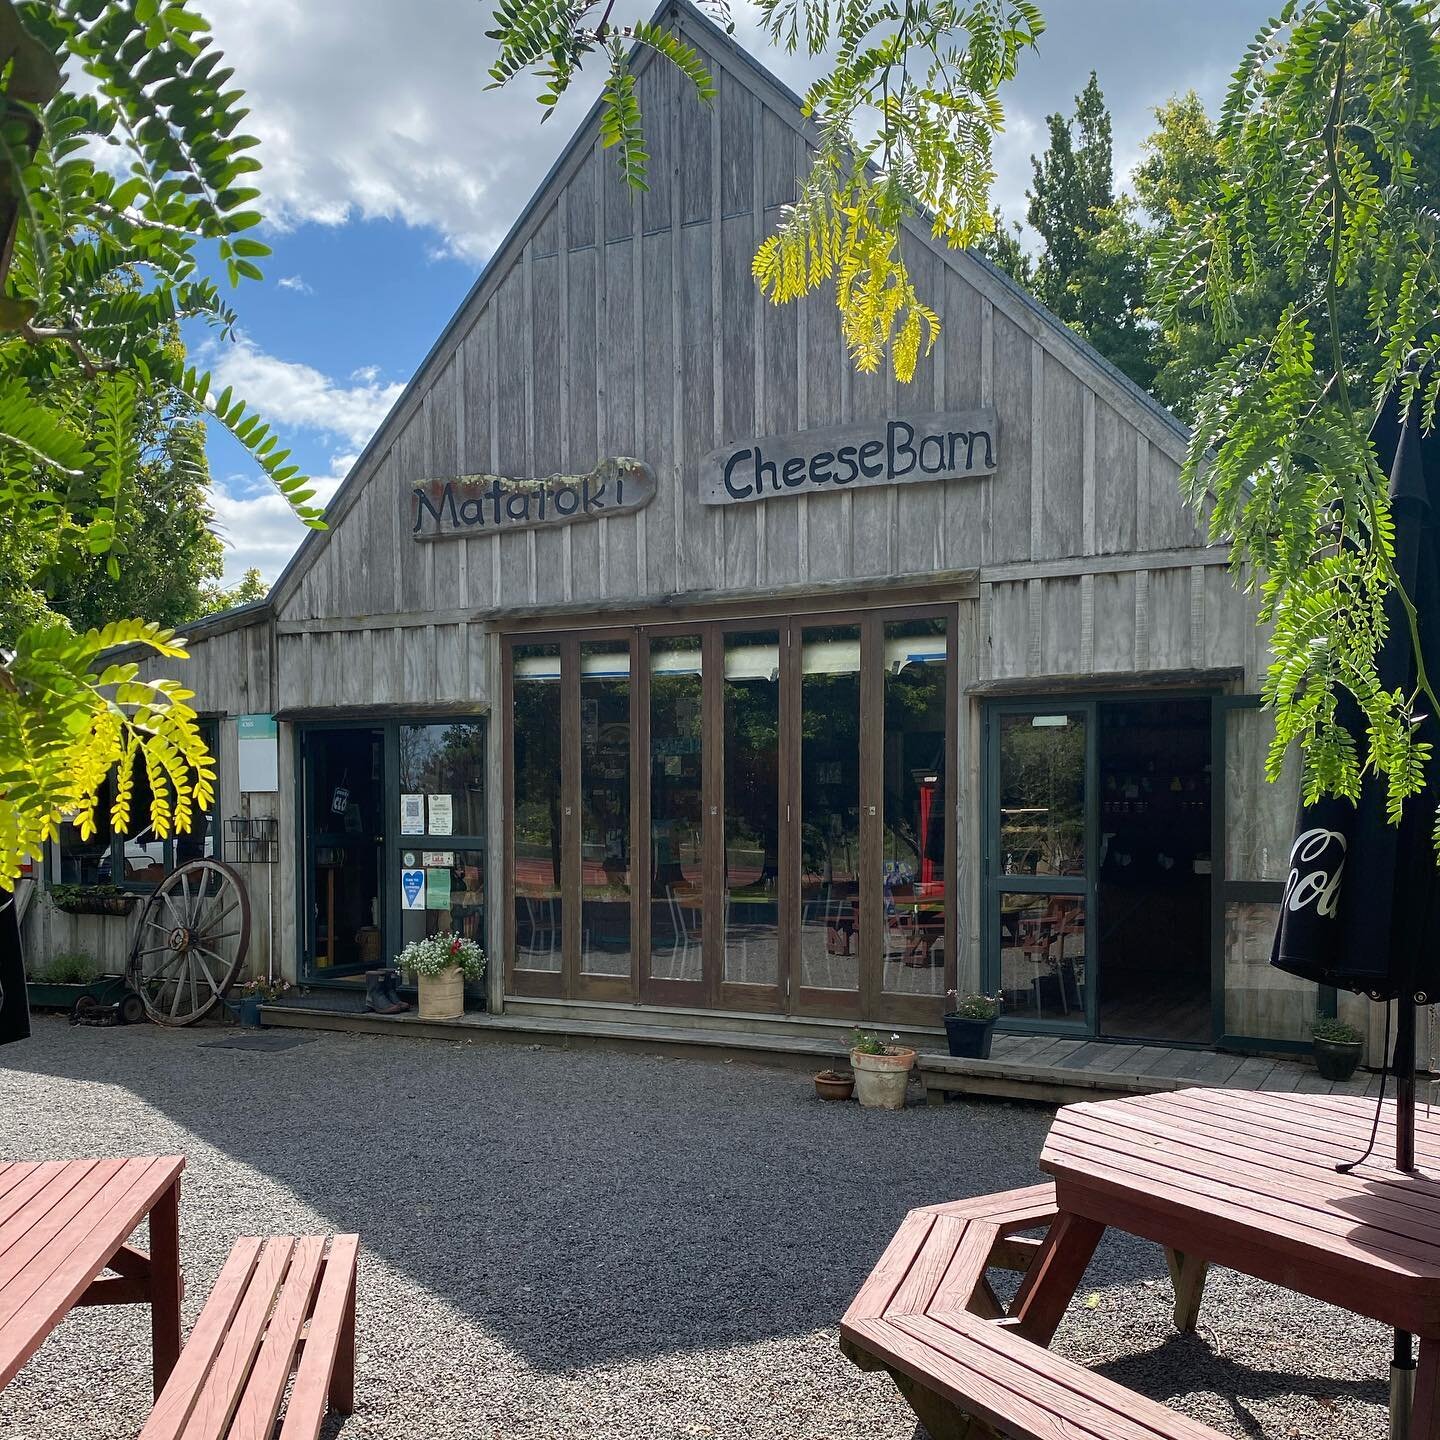 Matatoki Cheese Barn is worth a look in &amp; not only for their award winning selection of cheese which is made onsite.  We stopped in this afternoon on our way home from Hamilton.  Perfect place for a cheeseboard &amp; wine outdoors.  Local product